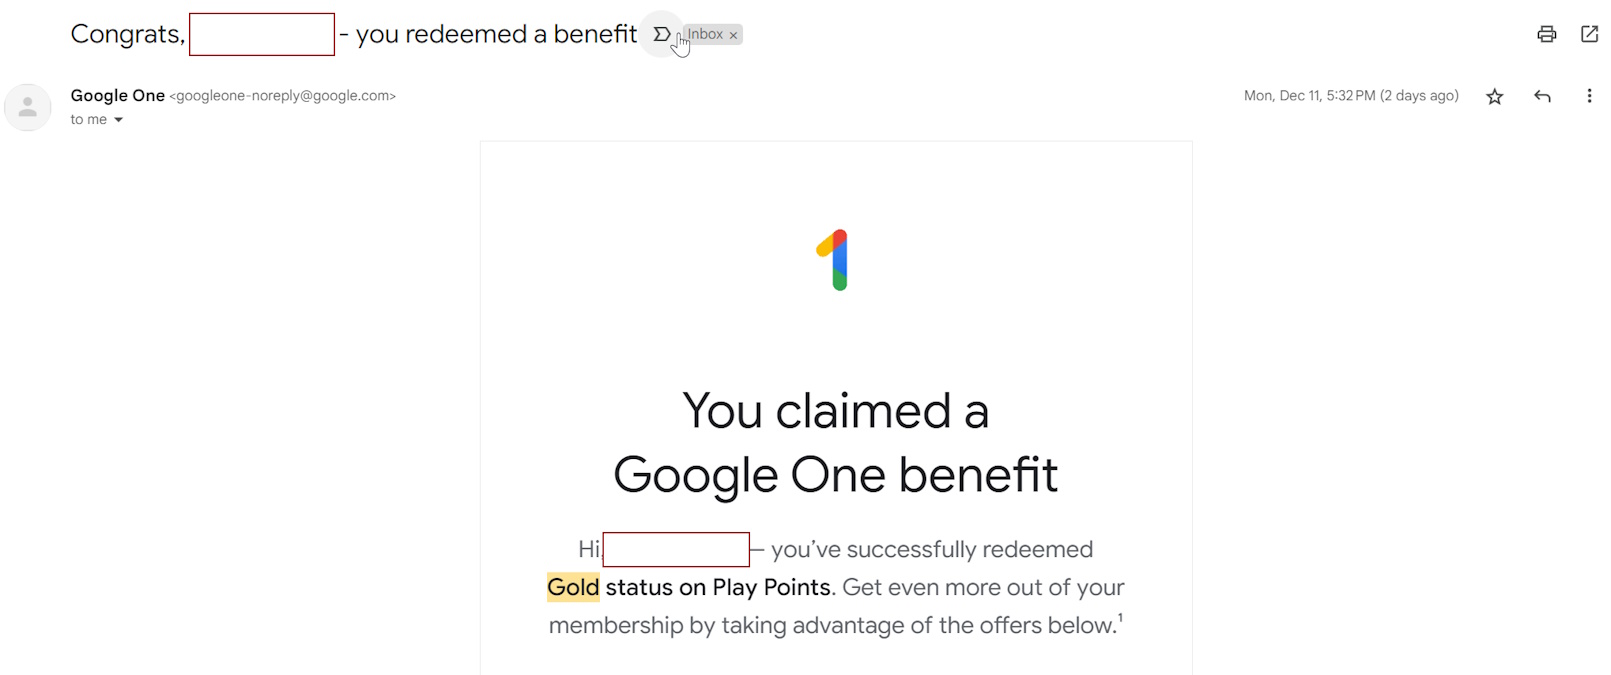 Google One 2TB membership benefit Gold Play Points